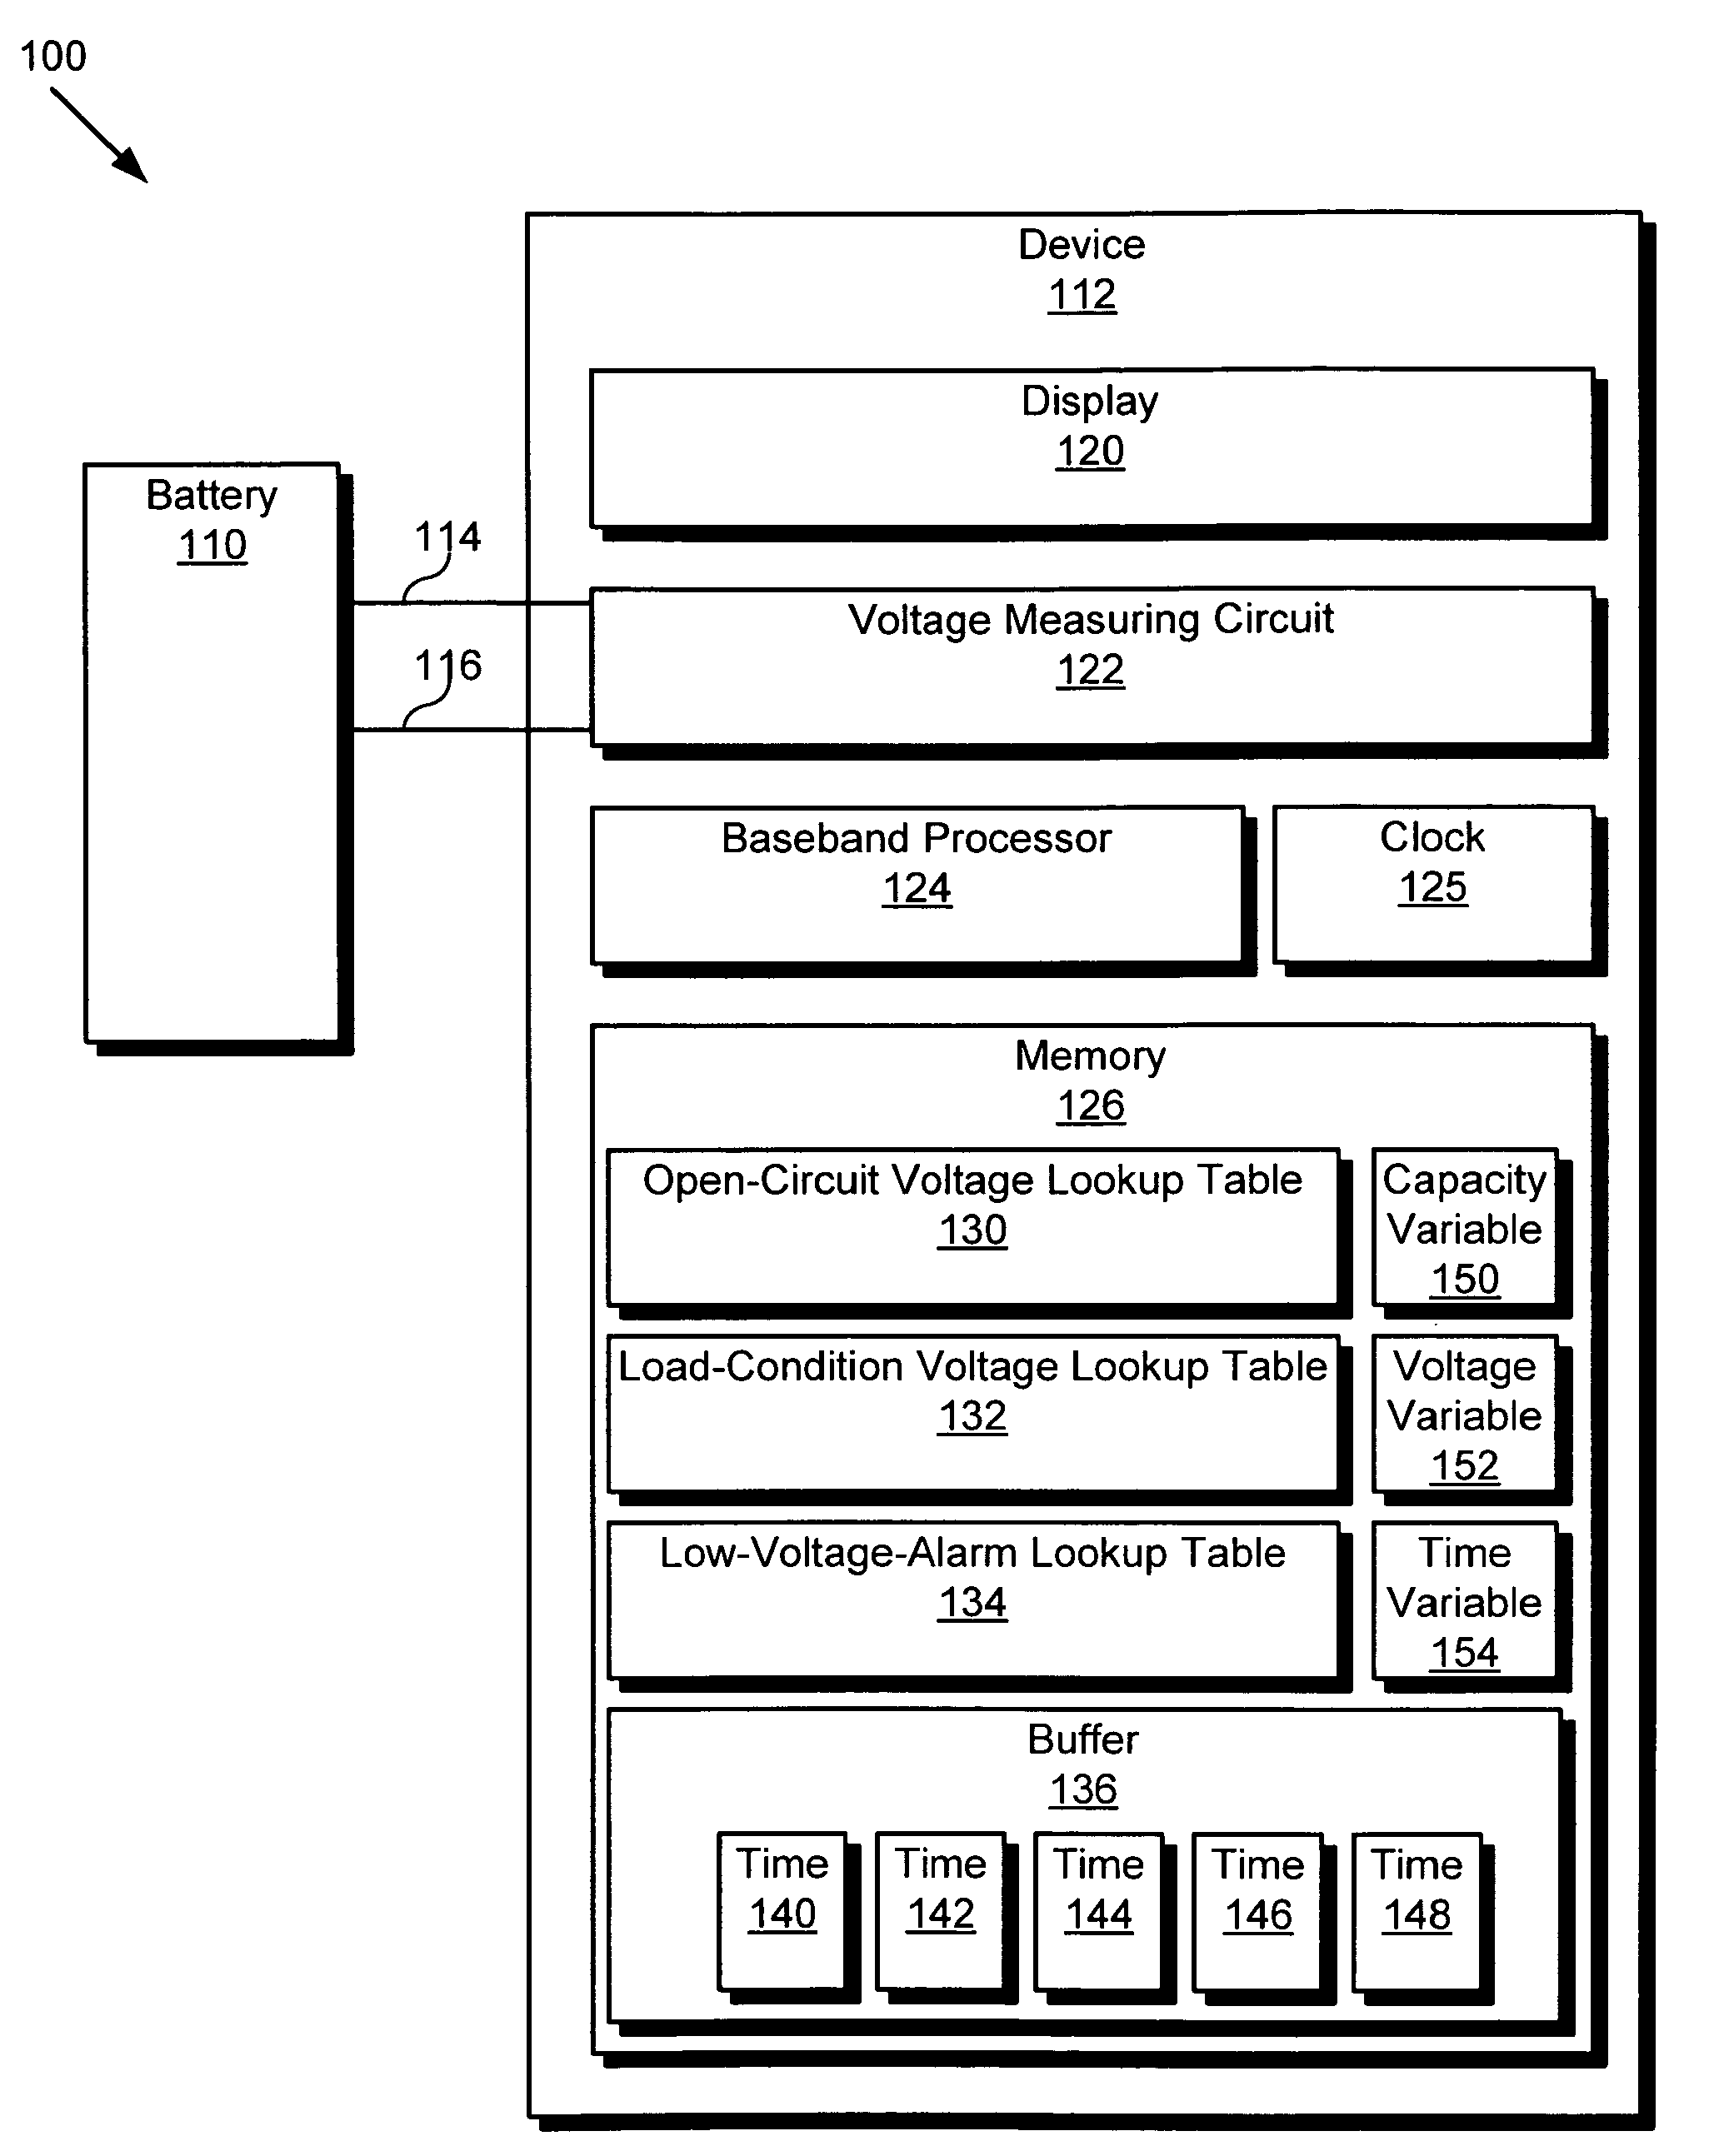 Method for accurate battery run time estimation utilizing load-condition voltage